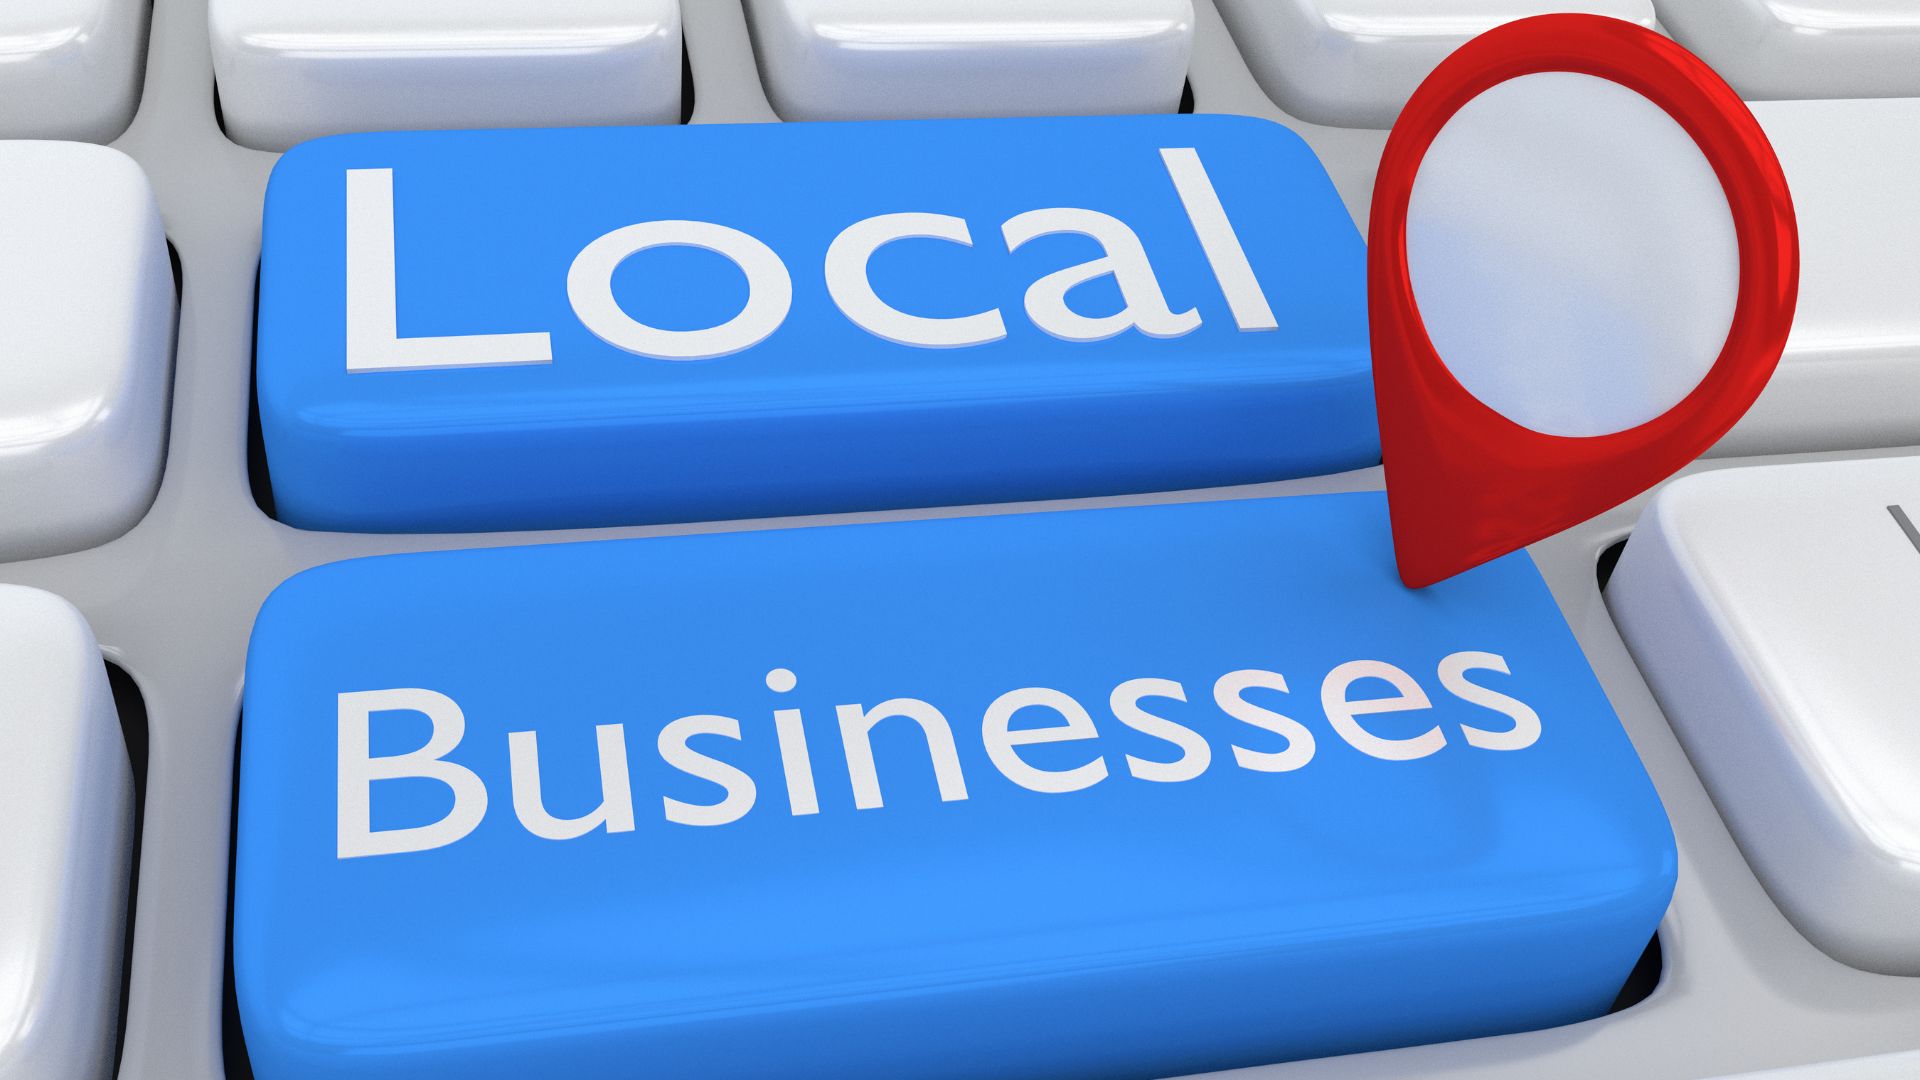 Why Local Businesses Need SEO? The Power Of SEO In Today's Digital World